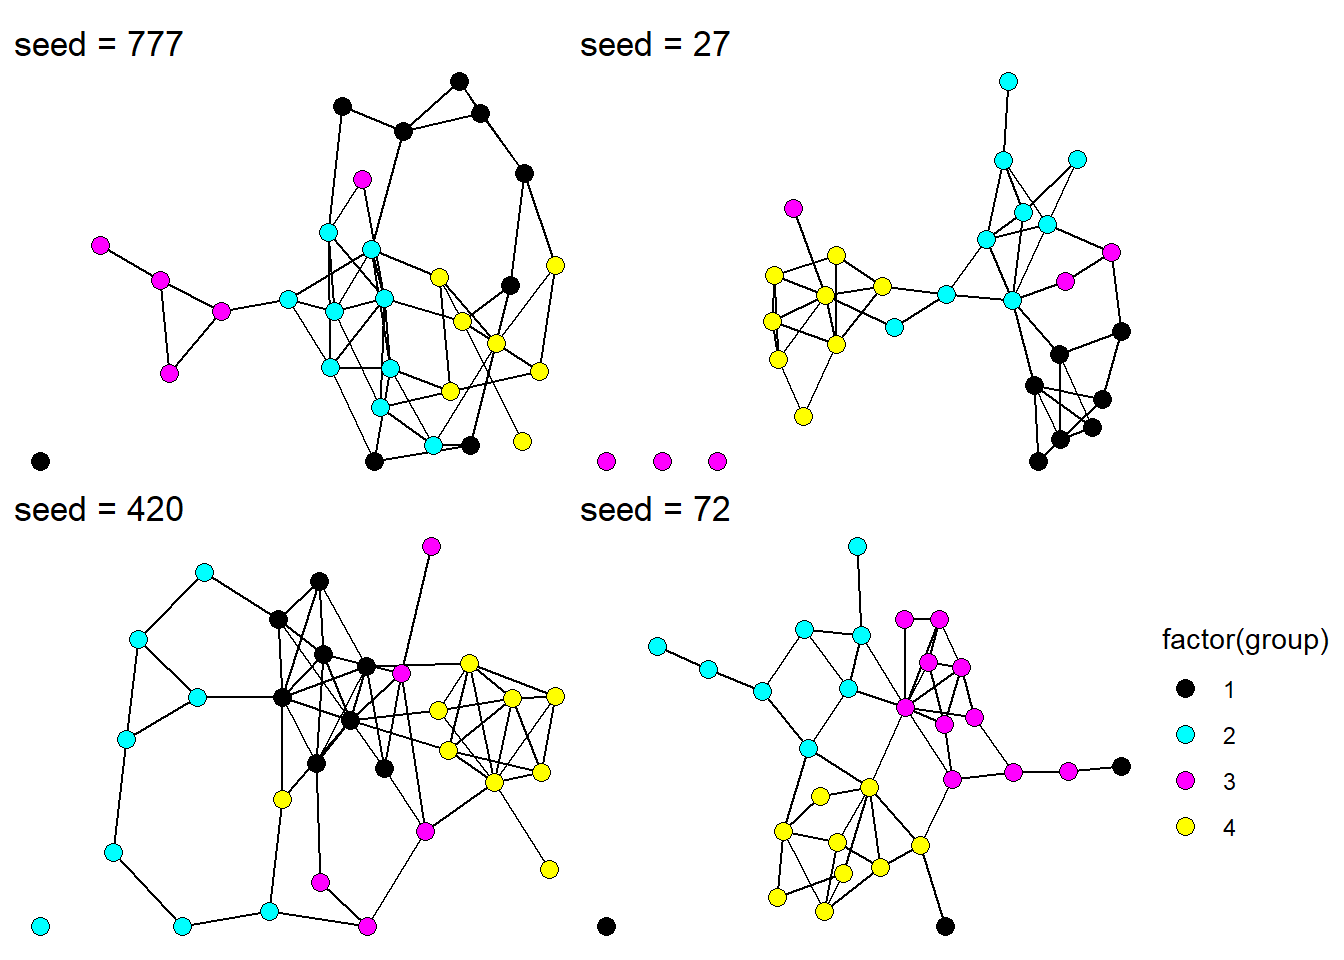 Complete undirected networks for four different seed values.